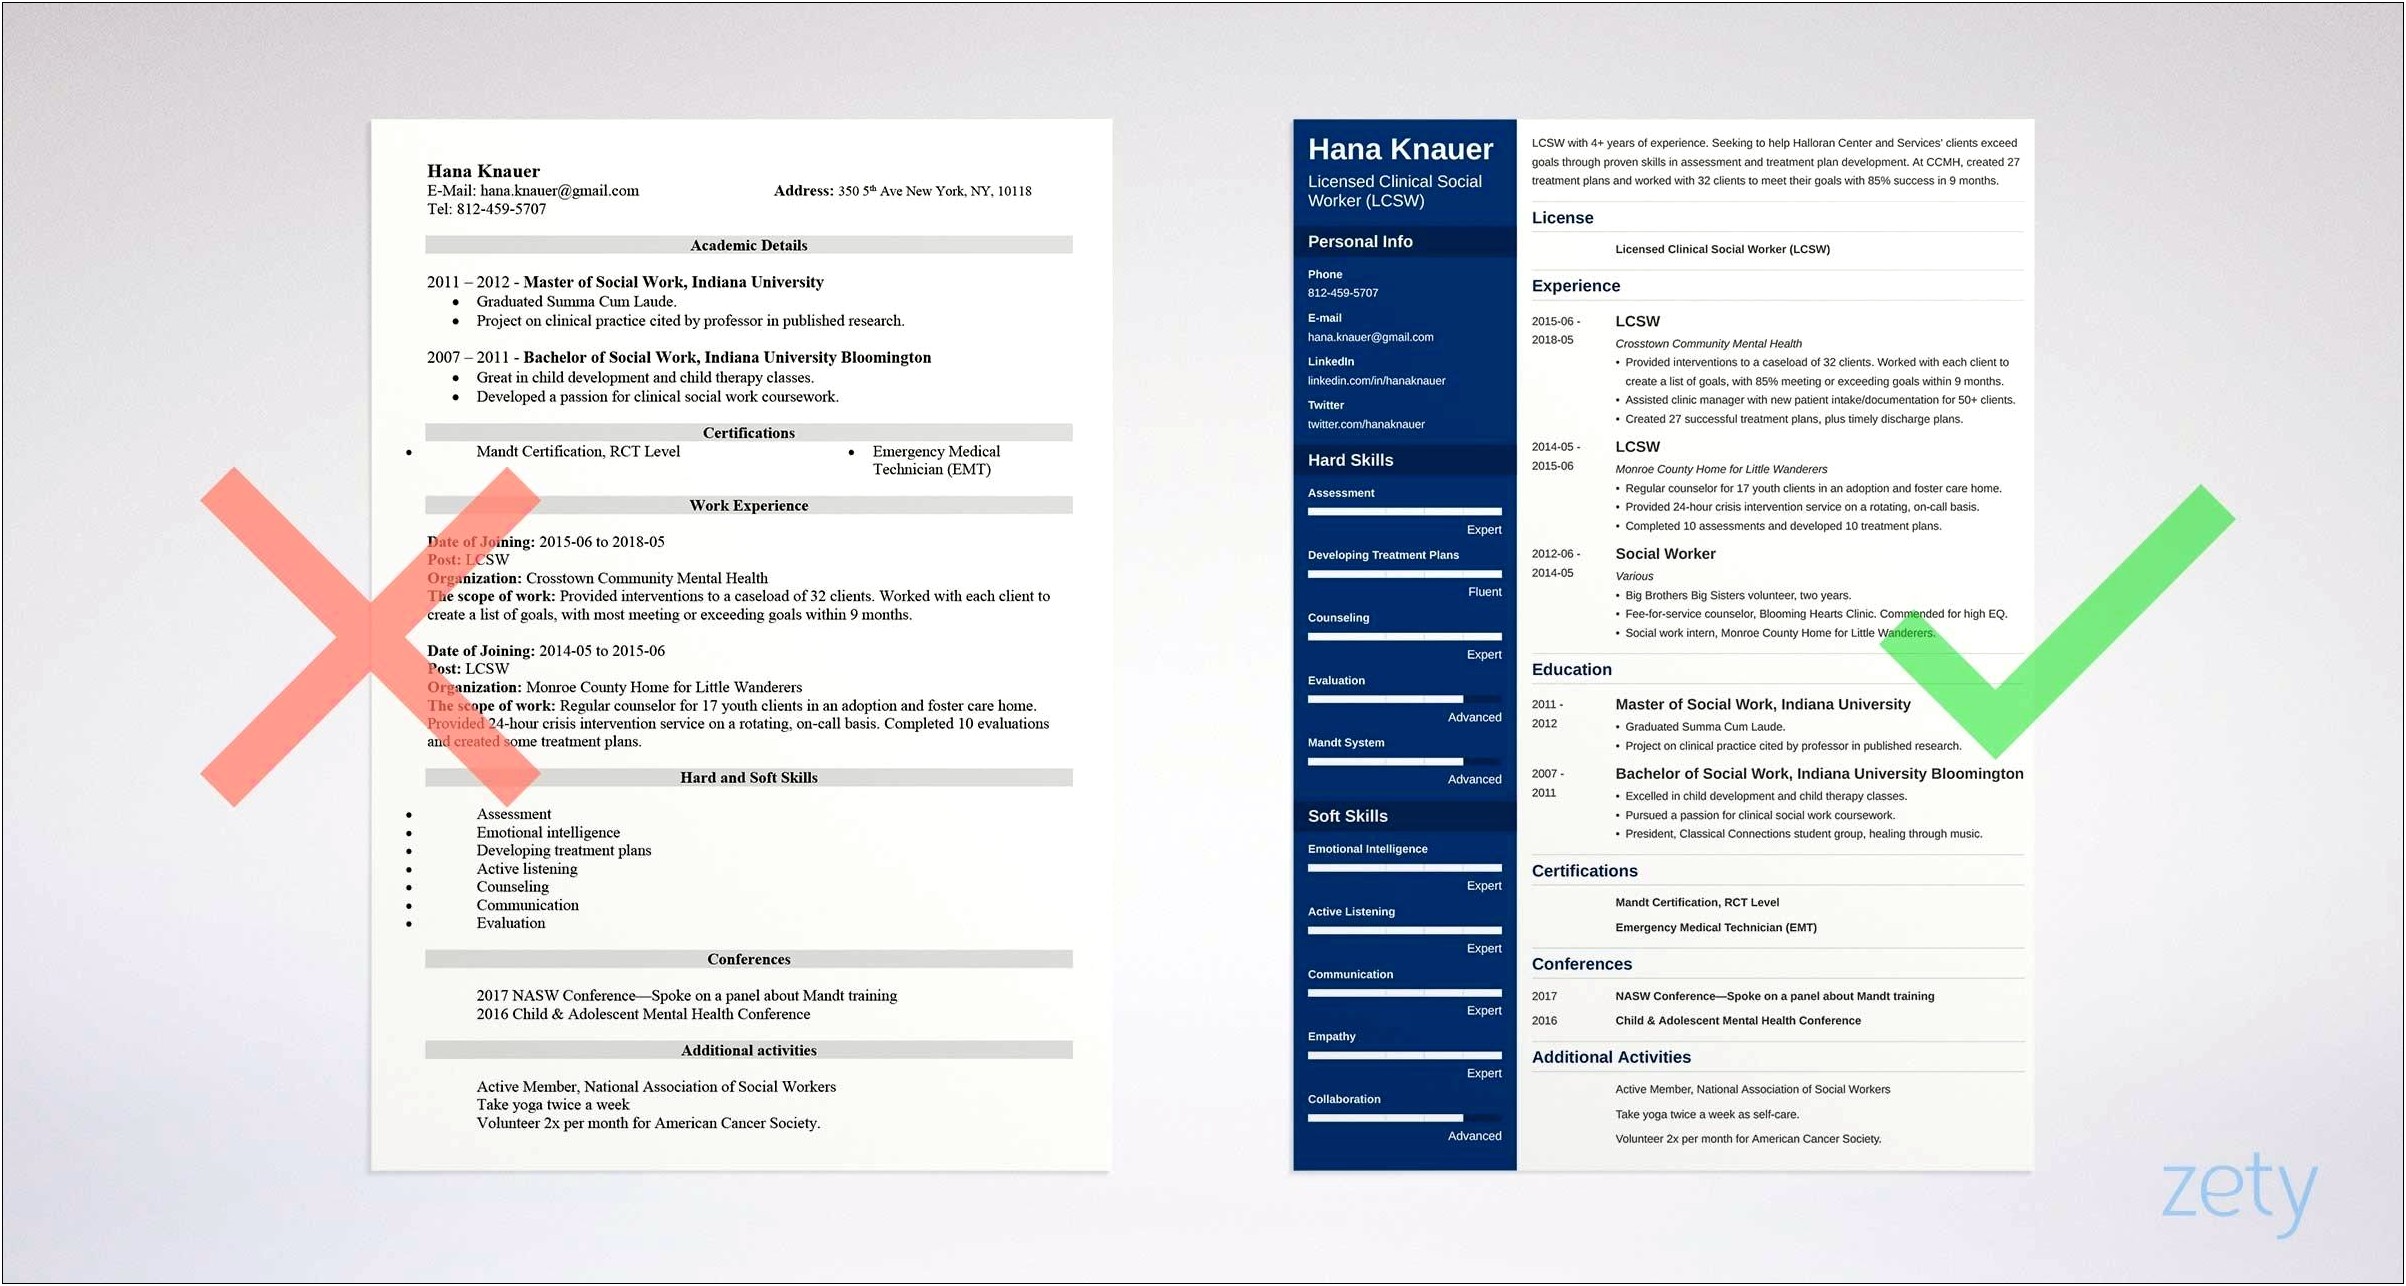 Resume Examples For Child Protection Social Workers